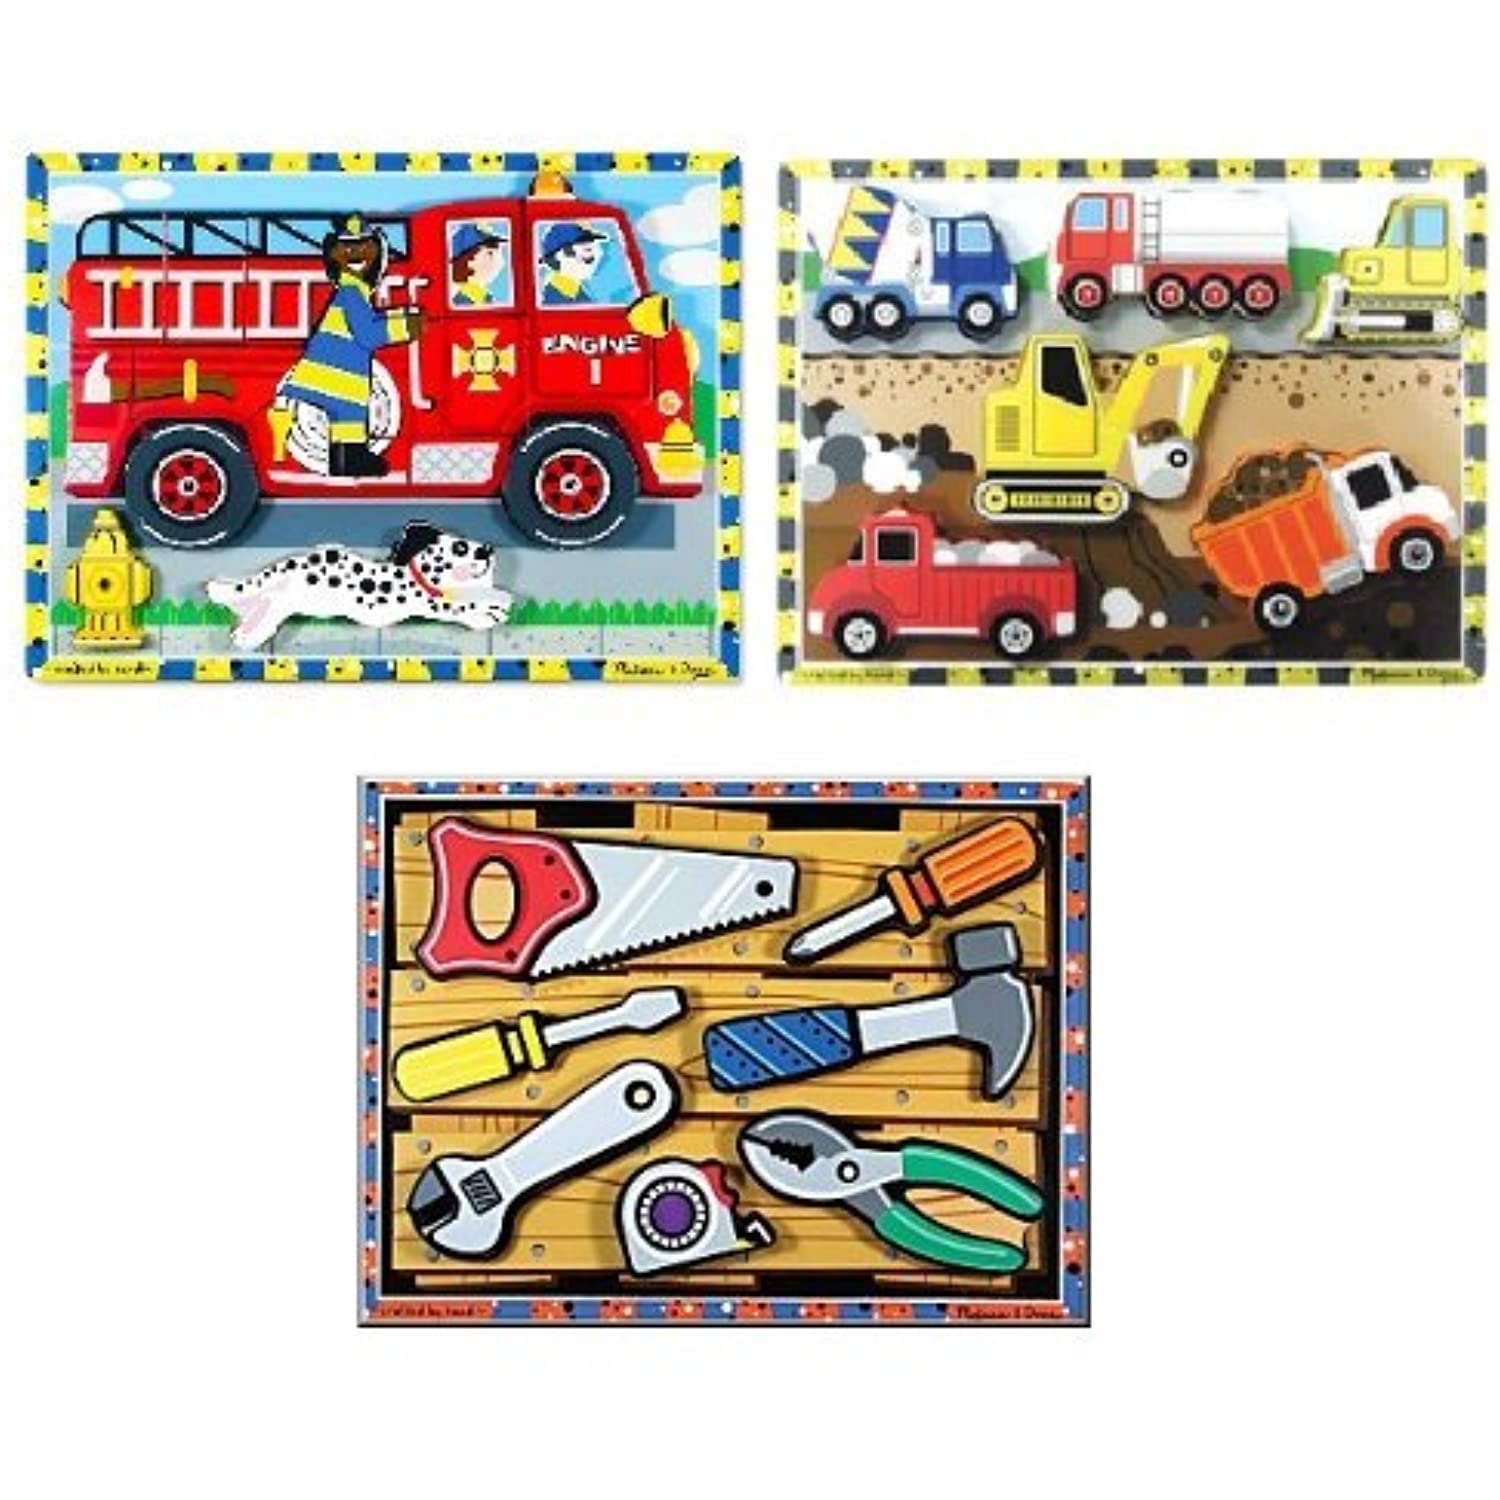 Melissa and Doug Wooden Chunky Puzzles Bundle of 3: Fire Truck, Construction, and Tools